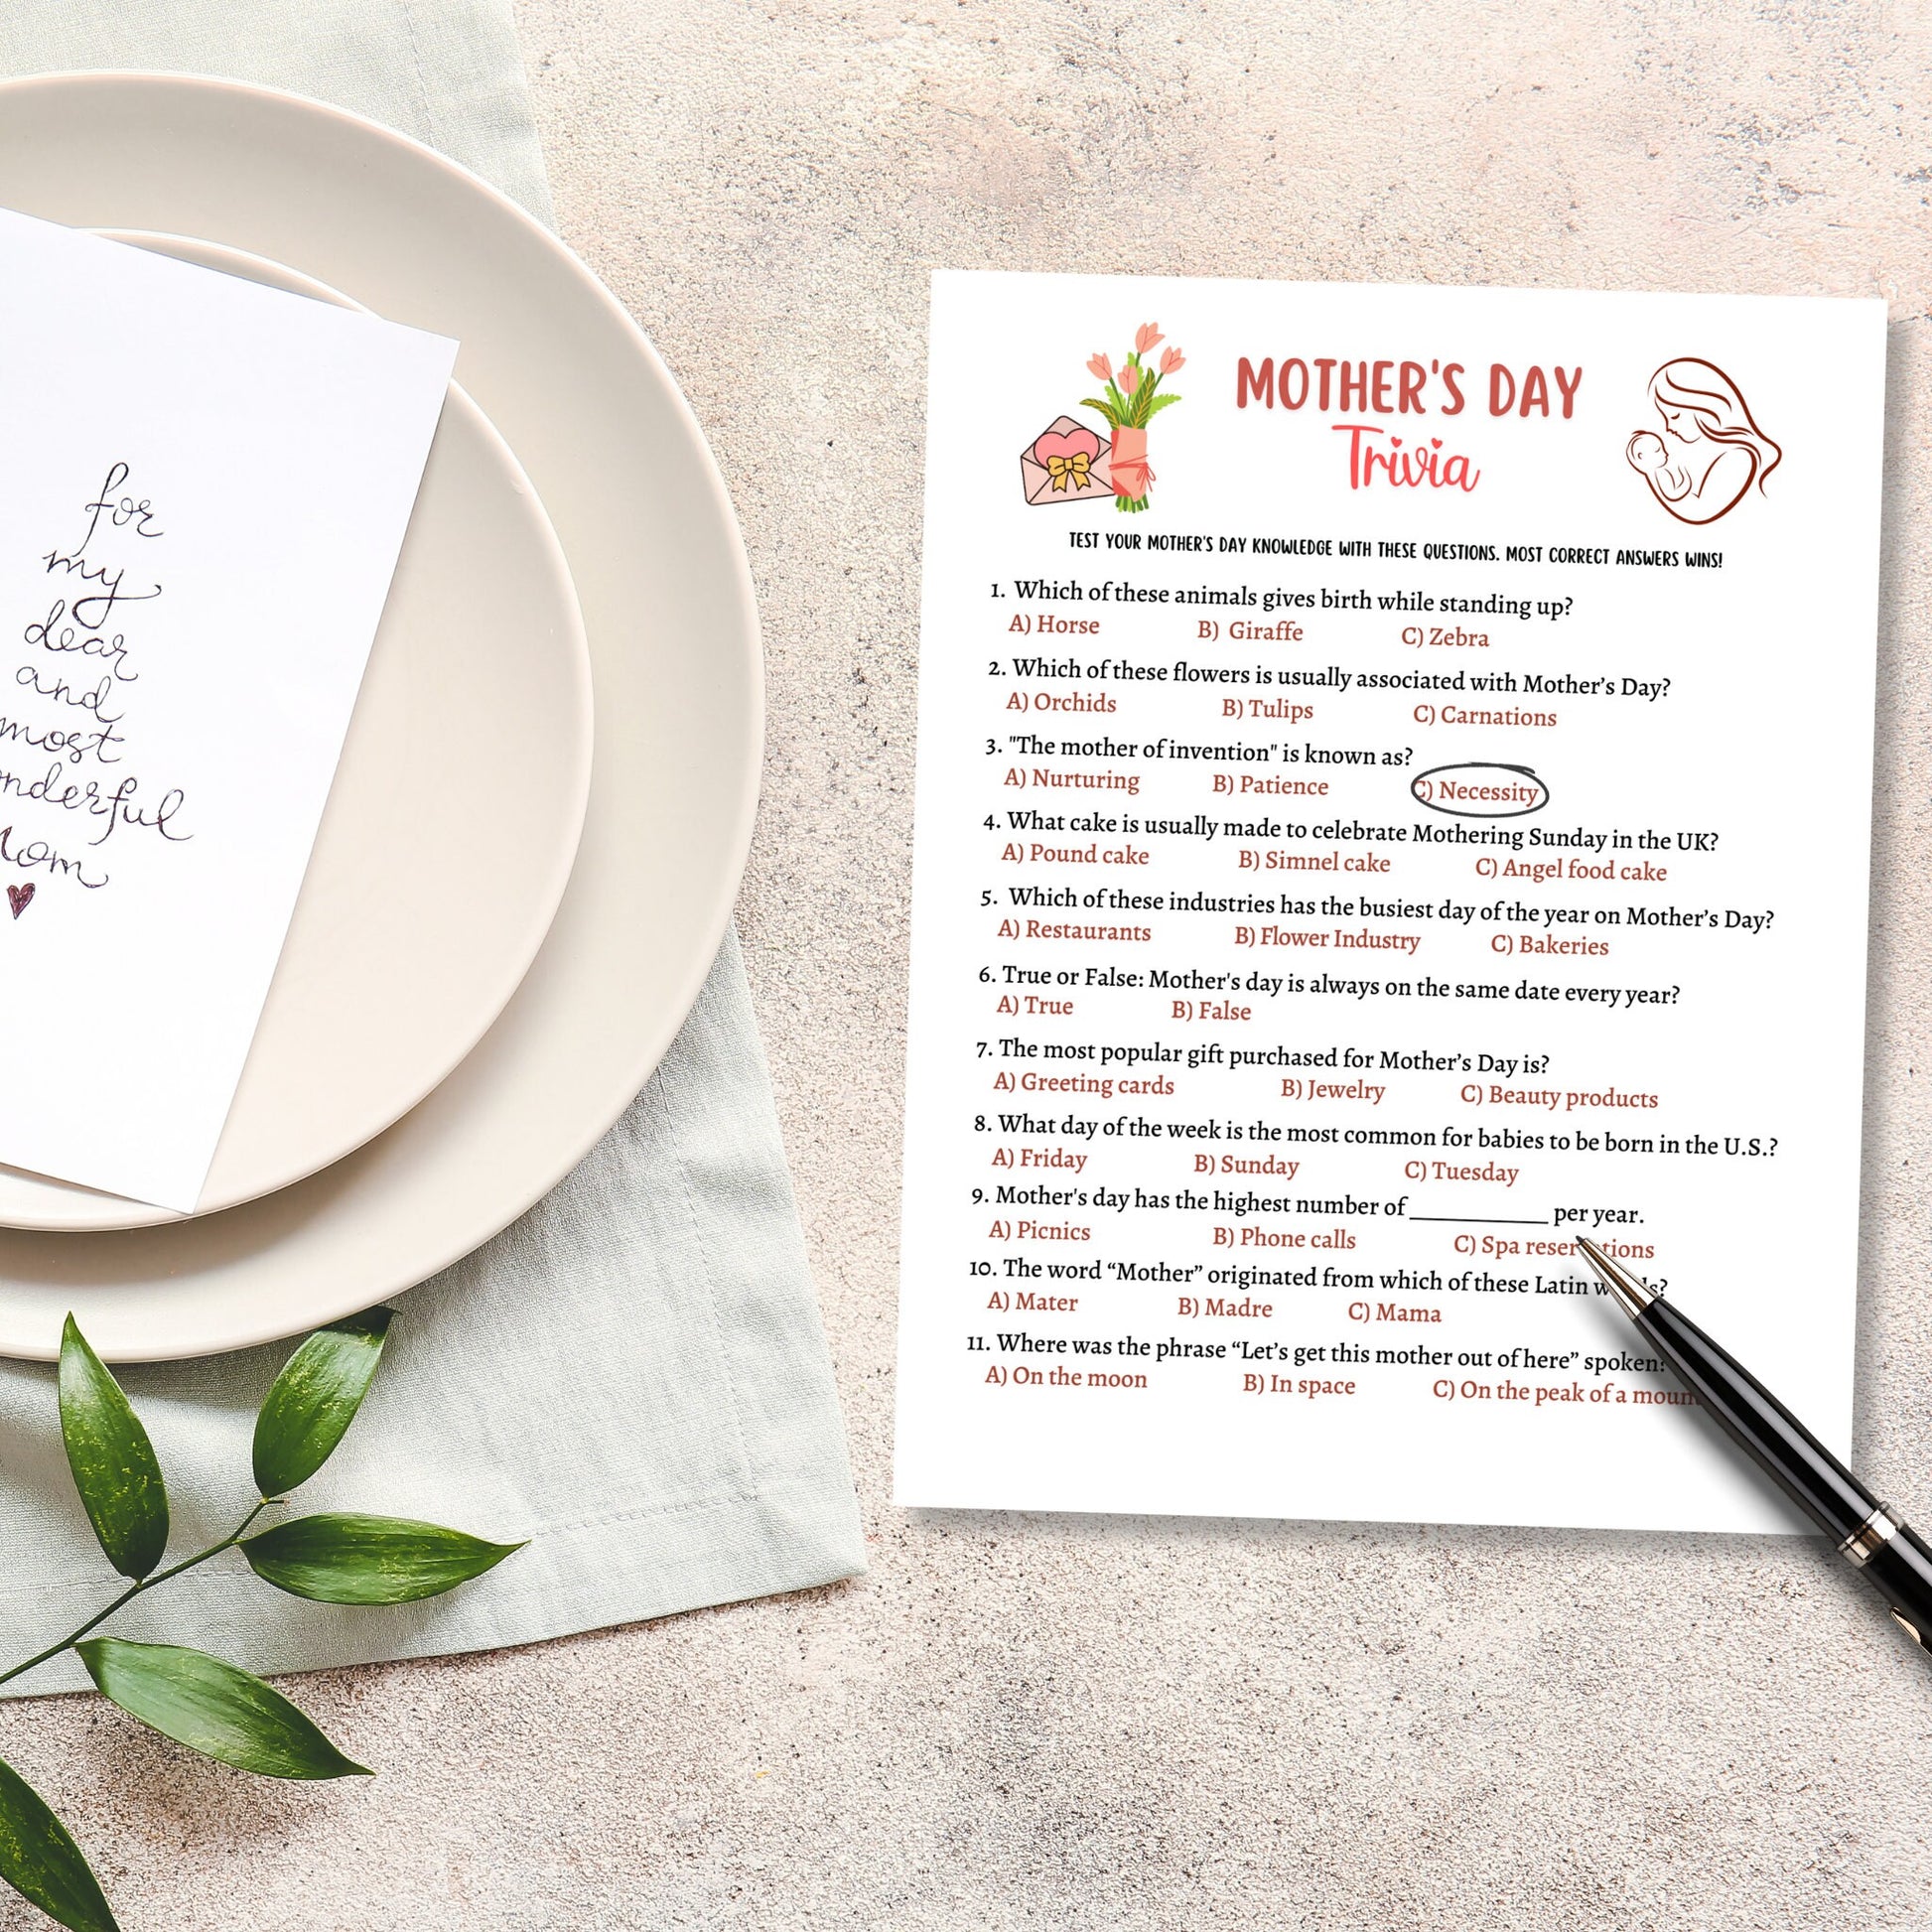 Mother's Day Trivia Game Printable, Mothers Day Party Game, True or False Quiz, Mother's Day Activity Kids And Adults, Family Group Game